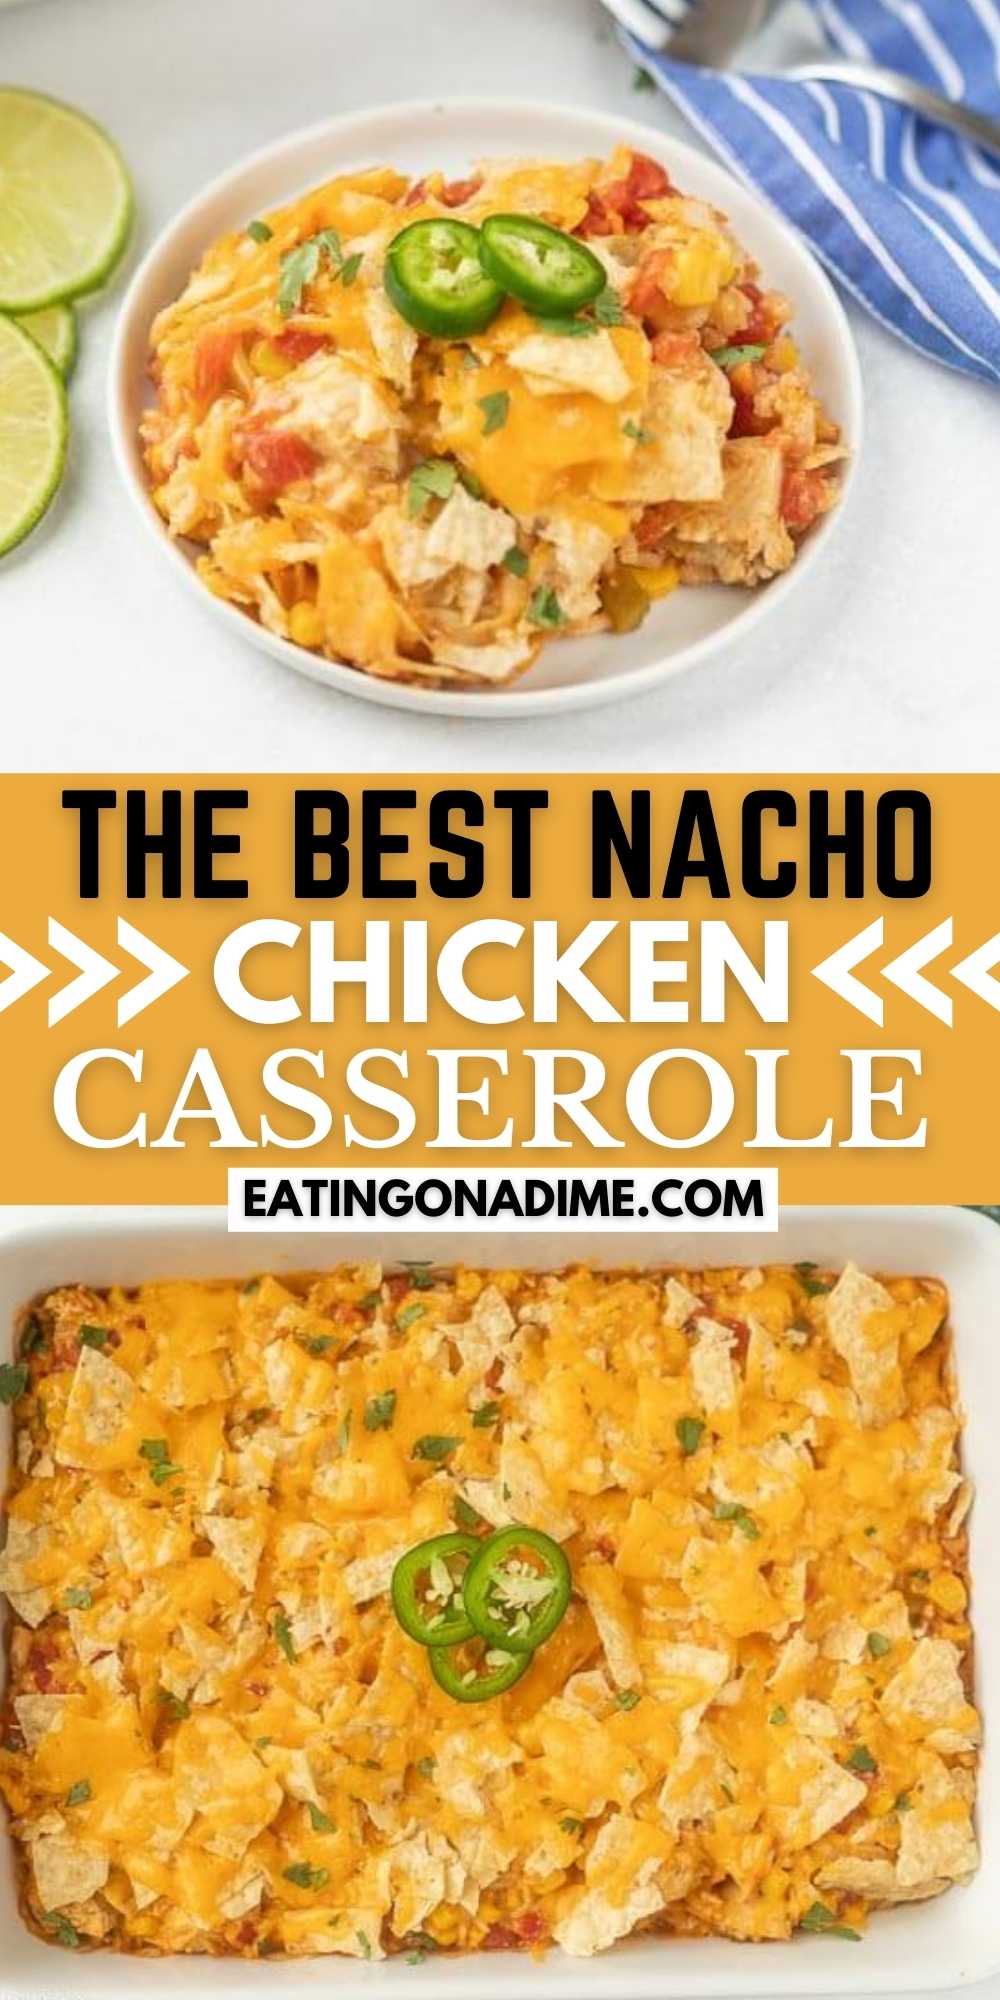 Easy Nacho Chicken Casserole Recipe is a family favorite that the entire family will love. Enjoy all of the flavors of nachos in a casserole. This easy Nacho Chicken Casserole with tortilla chips is simple to make and packed with tons of flavor! #eatingonadime #casserolerecipes #nachorecipes #chickenrecipes 
